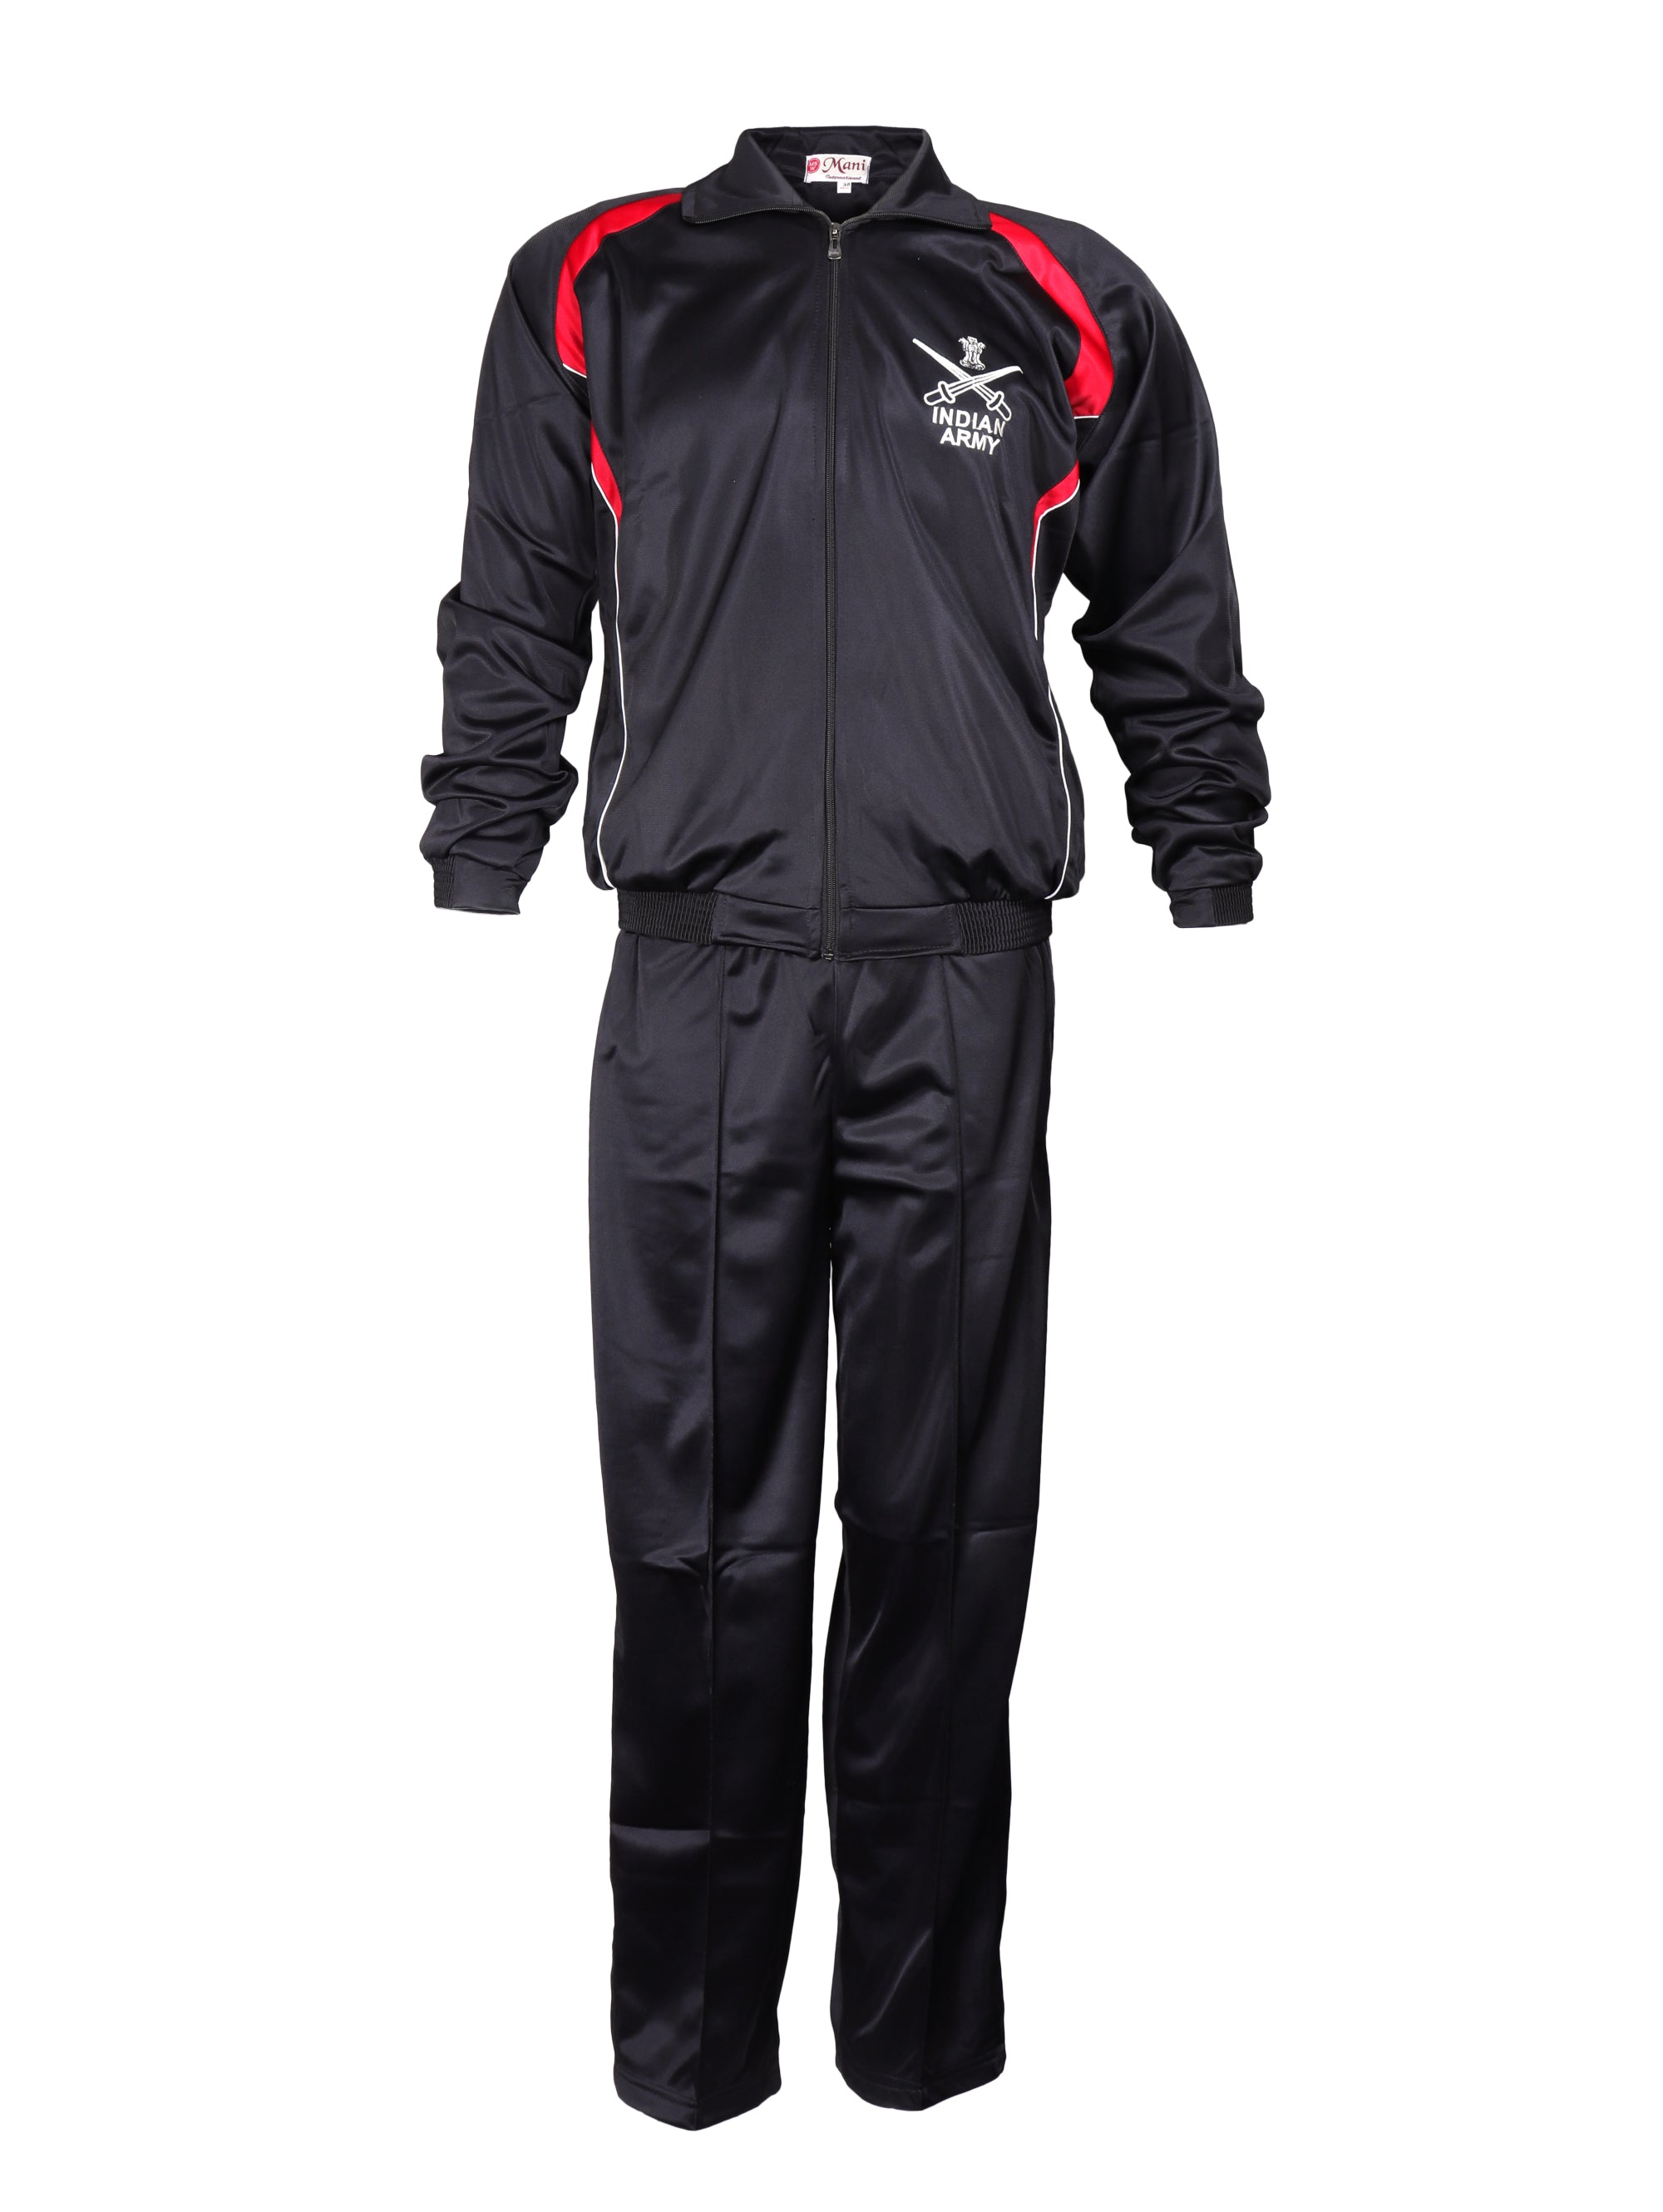 Indian Air Force Tracksuit : Confirm ownership for additional features ...